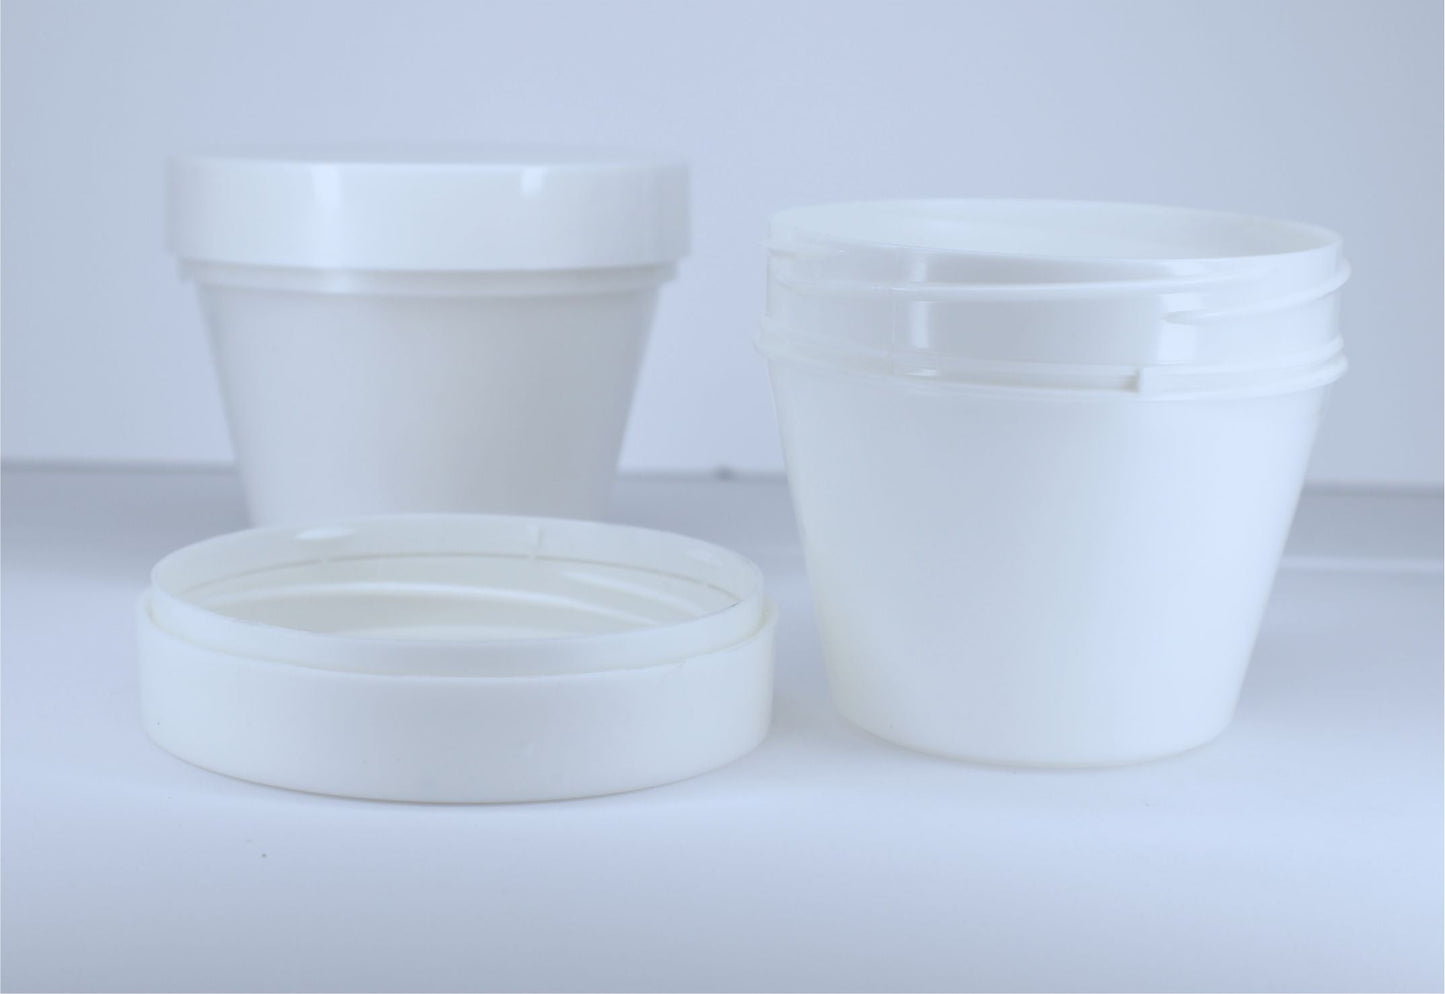 1ACRCBL - FreezAbowl 100% PLA Ice Cream, Butter Child Resistant and Tamper Evident Bowls - MSN Packaging Inc.